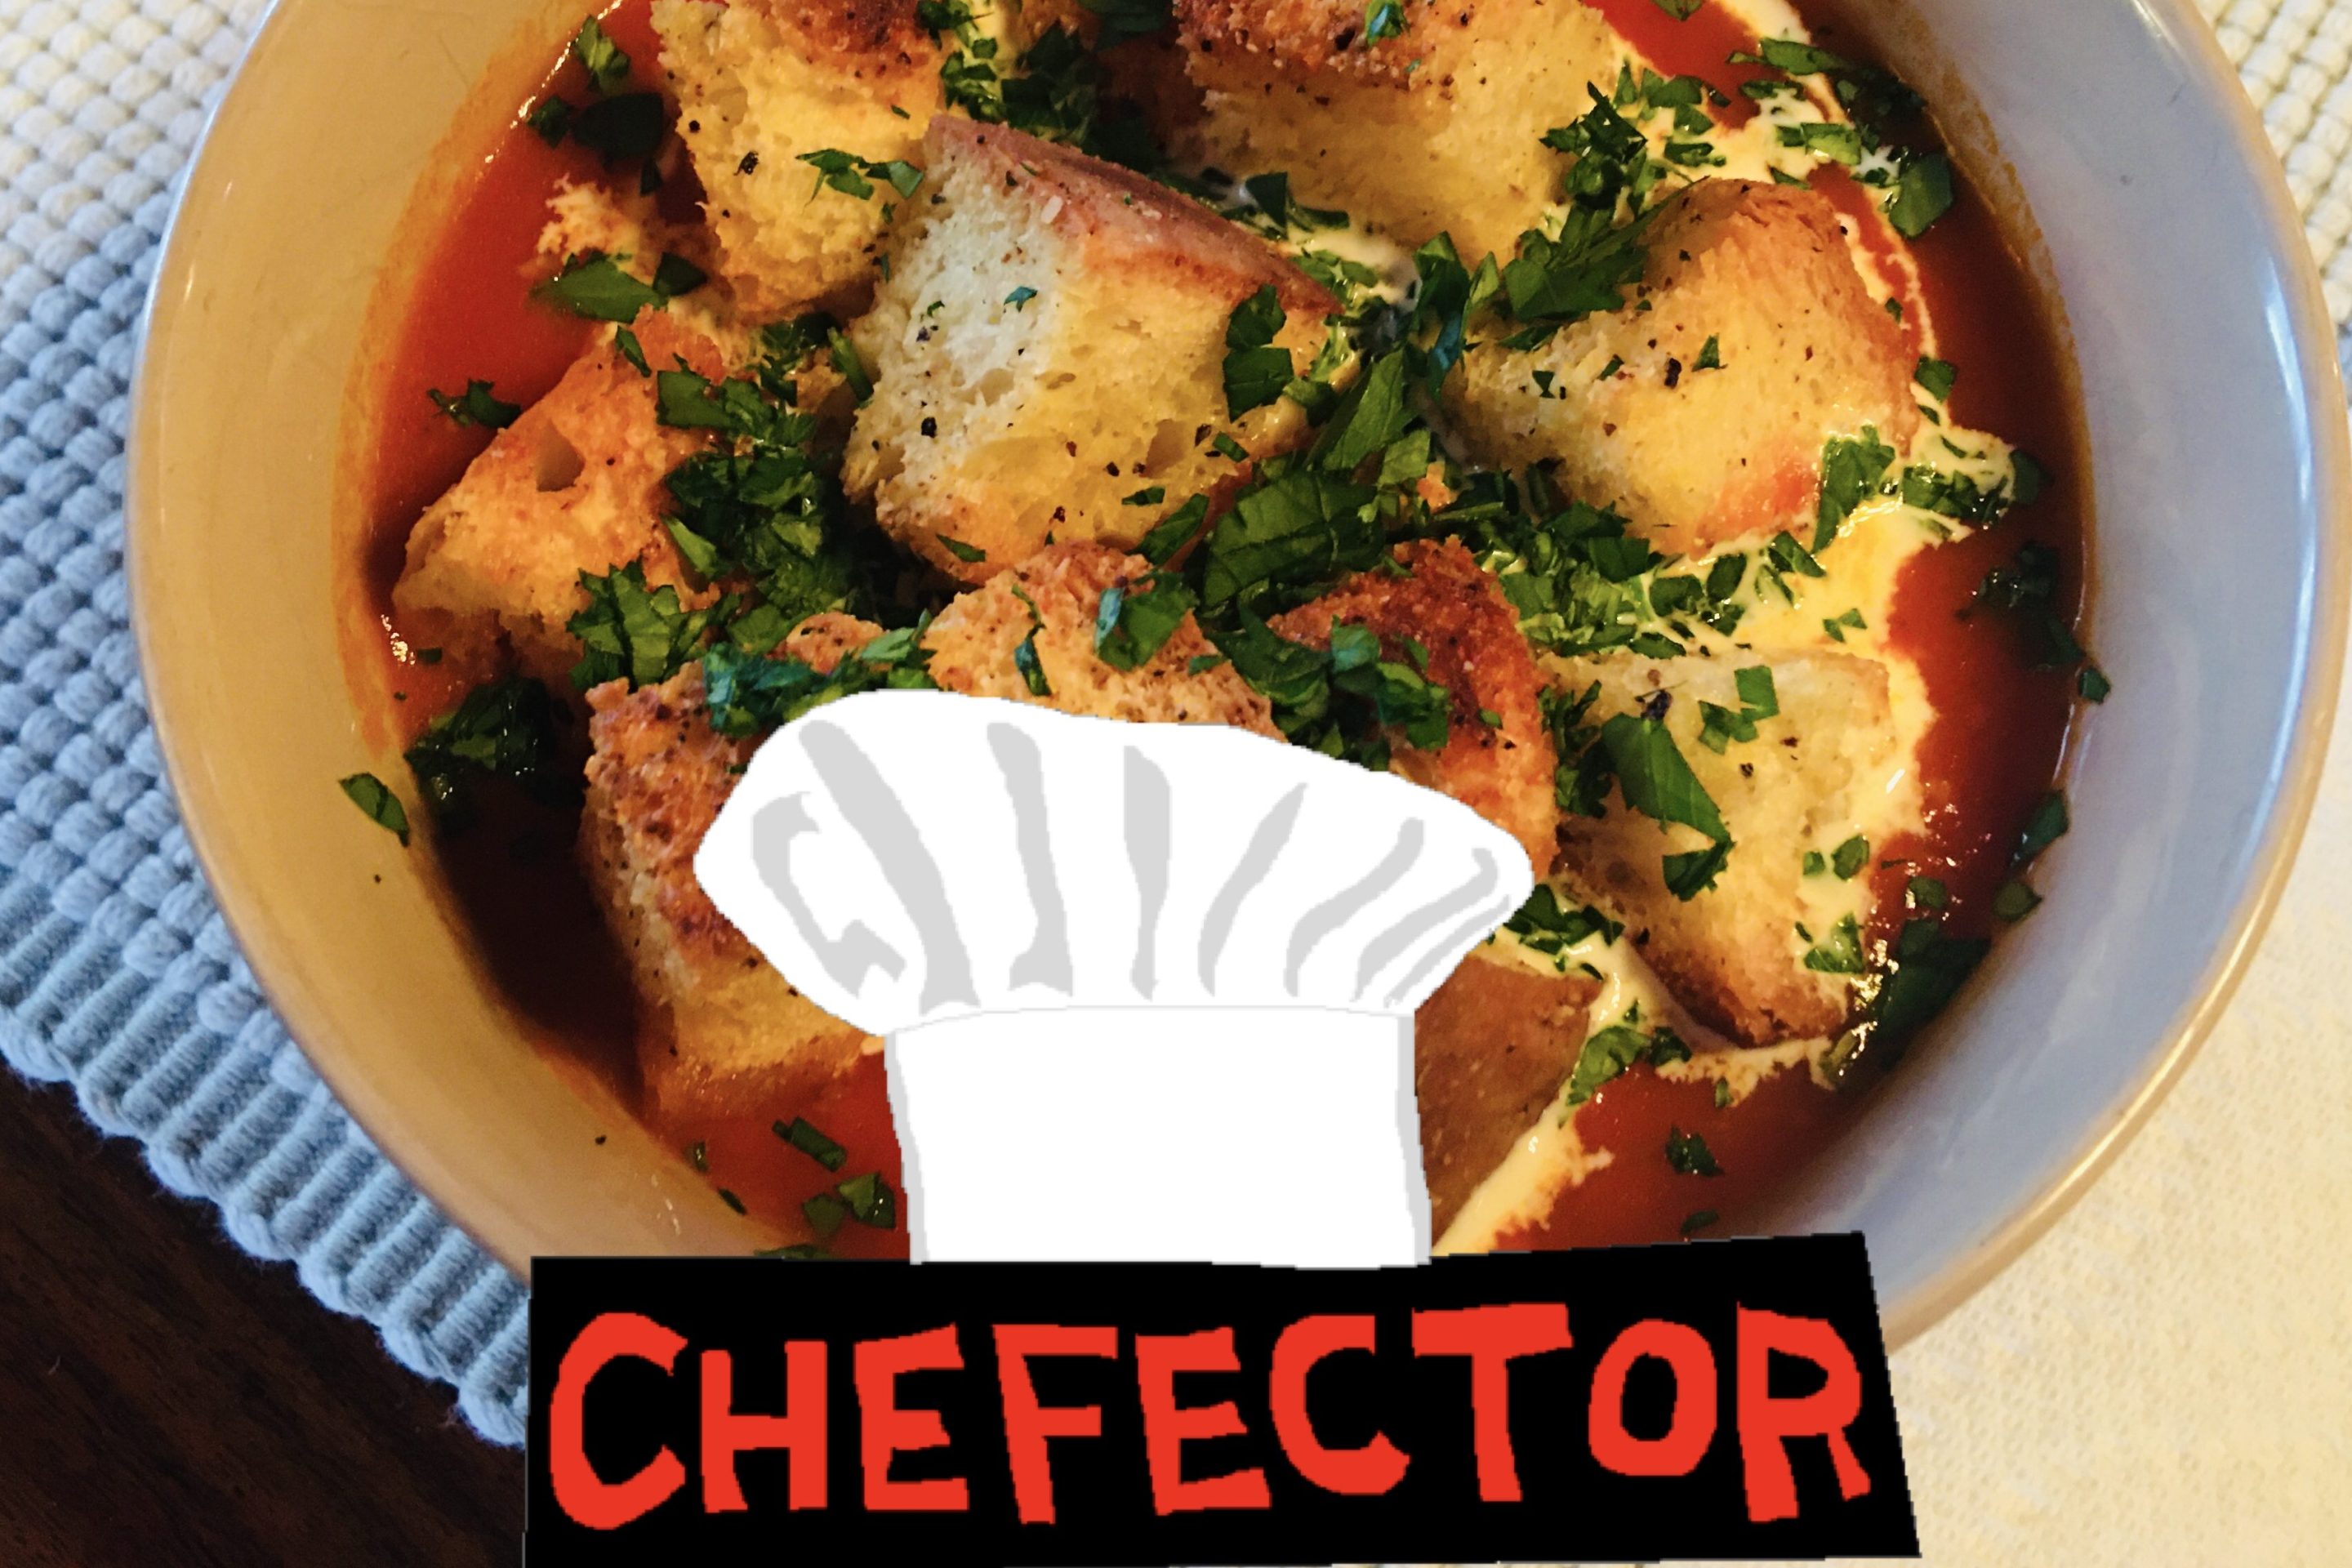 A bowl of tomato soup with croutons and herbs